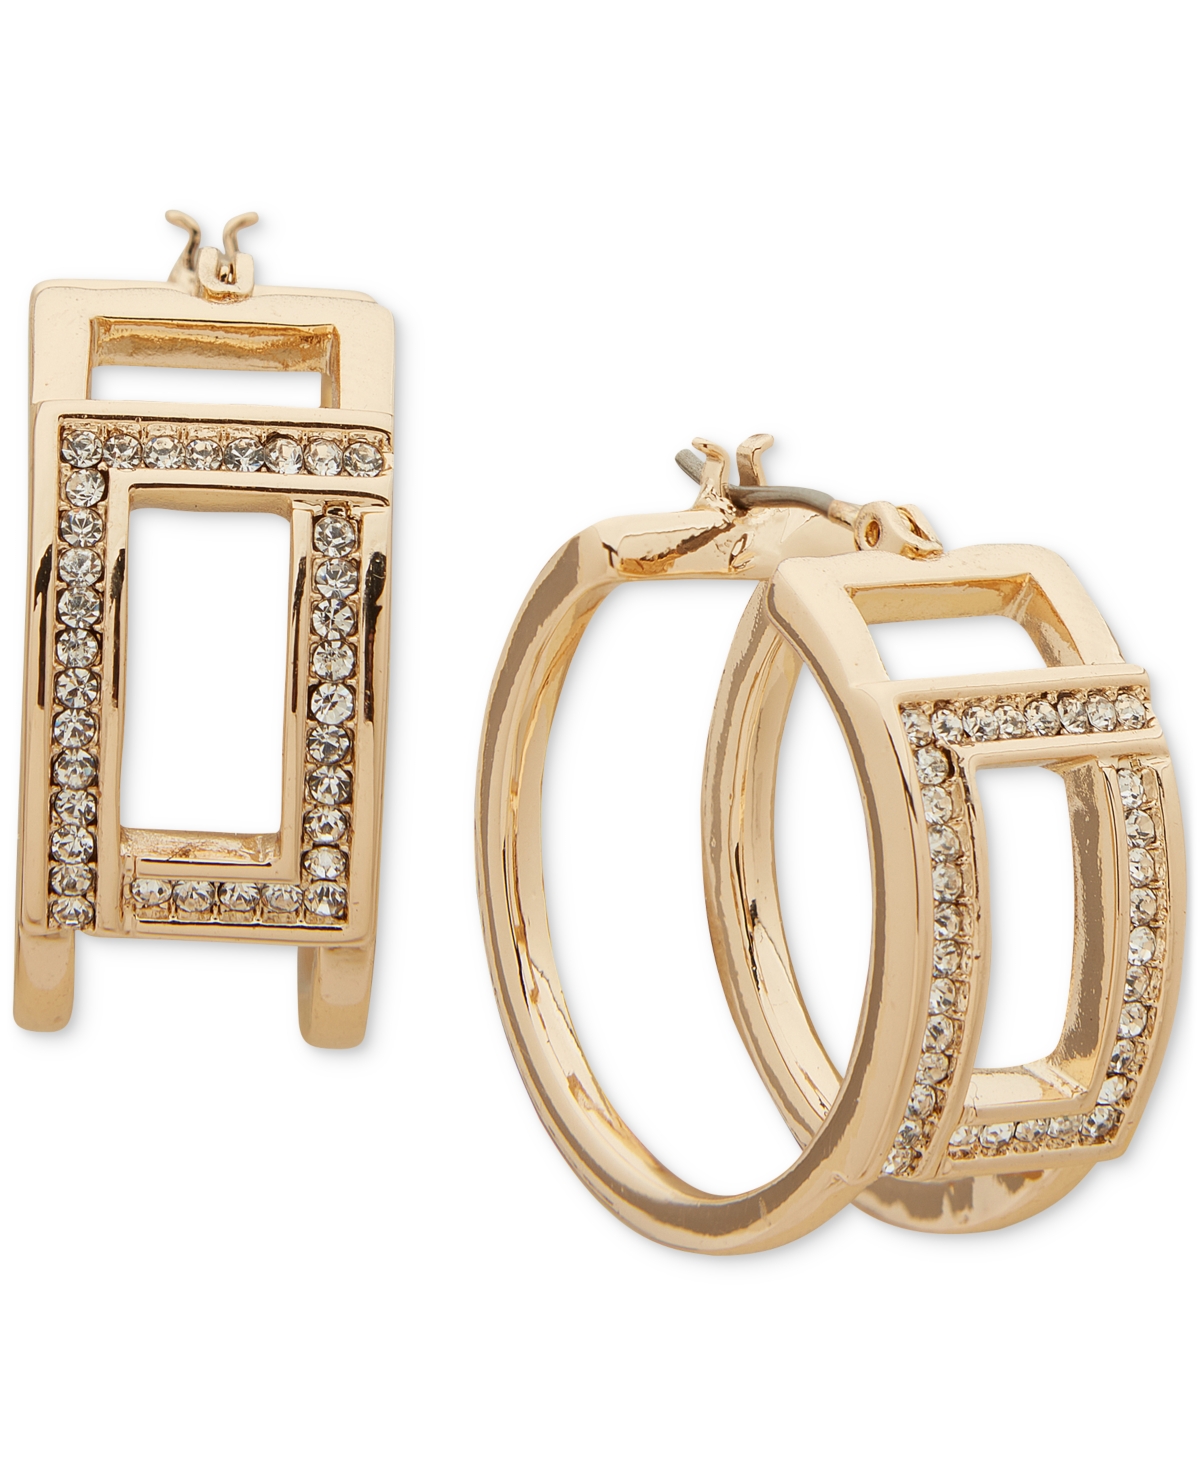 Gold-Tone Small Pave Open Hoop Earrings, 0.8" - Clear